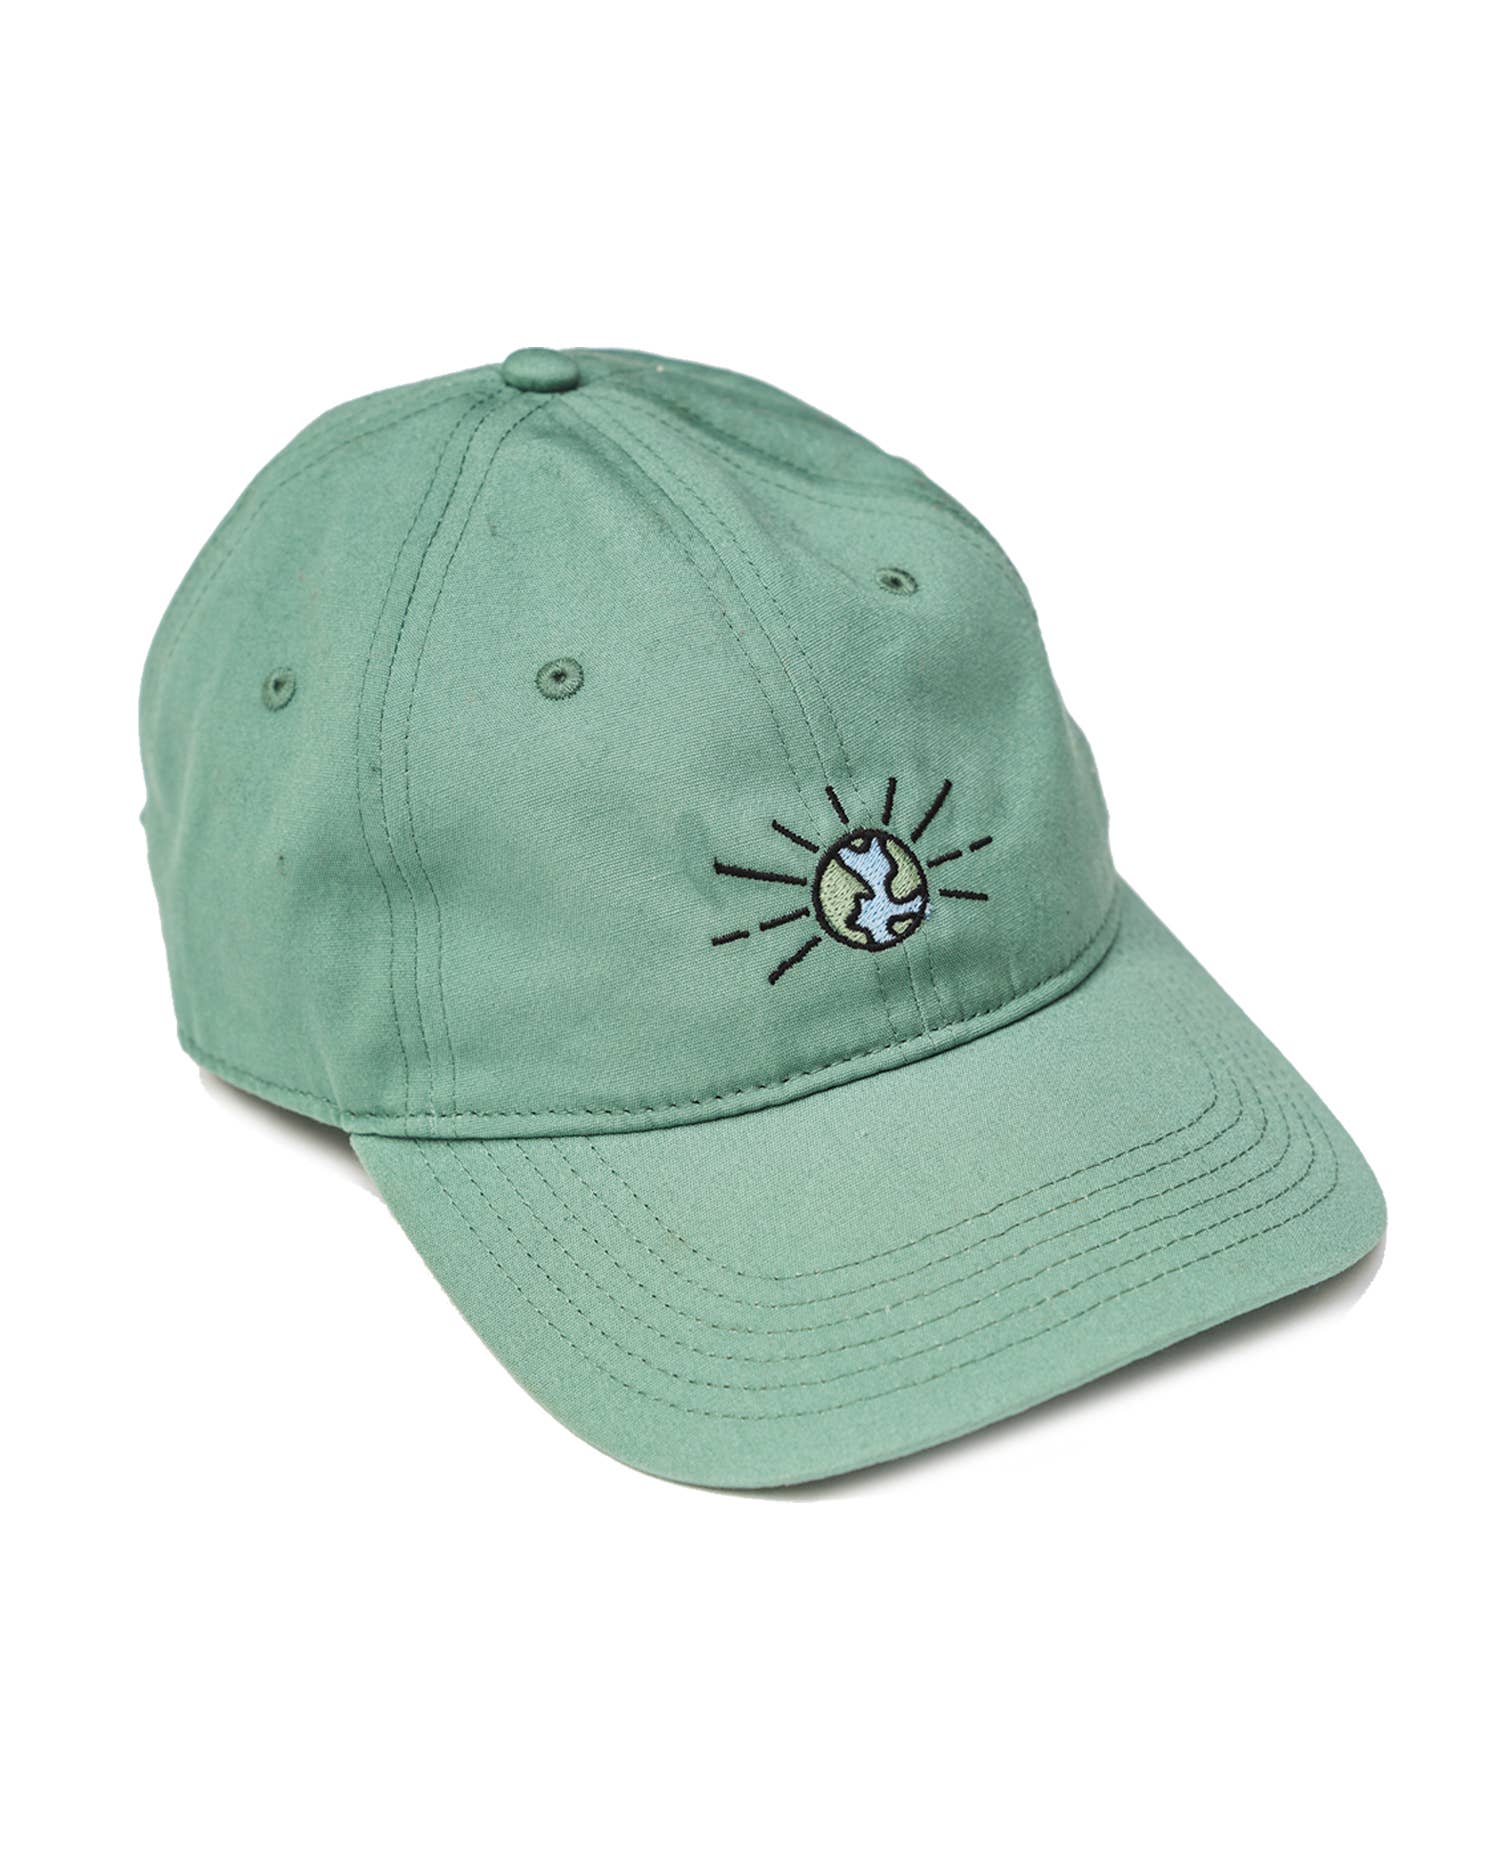 Earth Sage dad hat by Keep Nature Wild